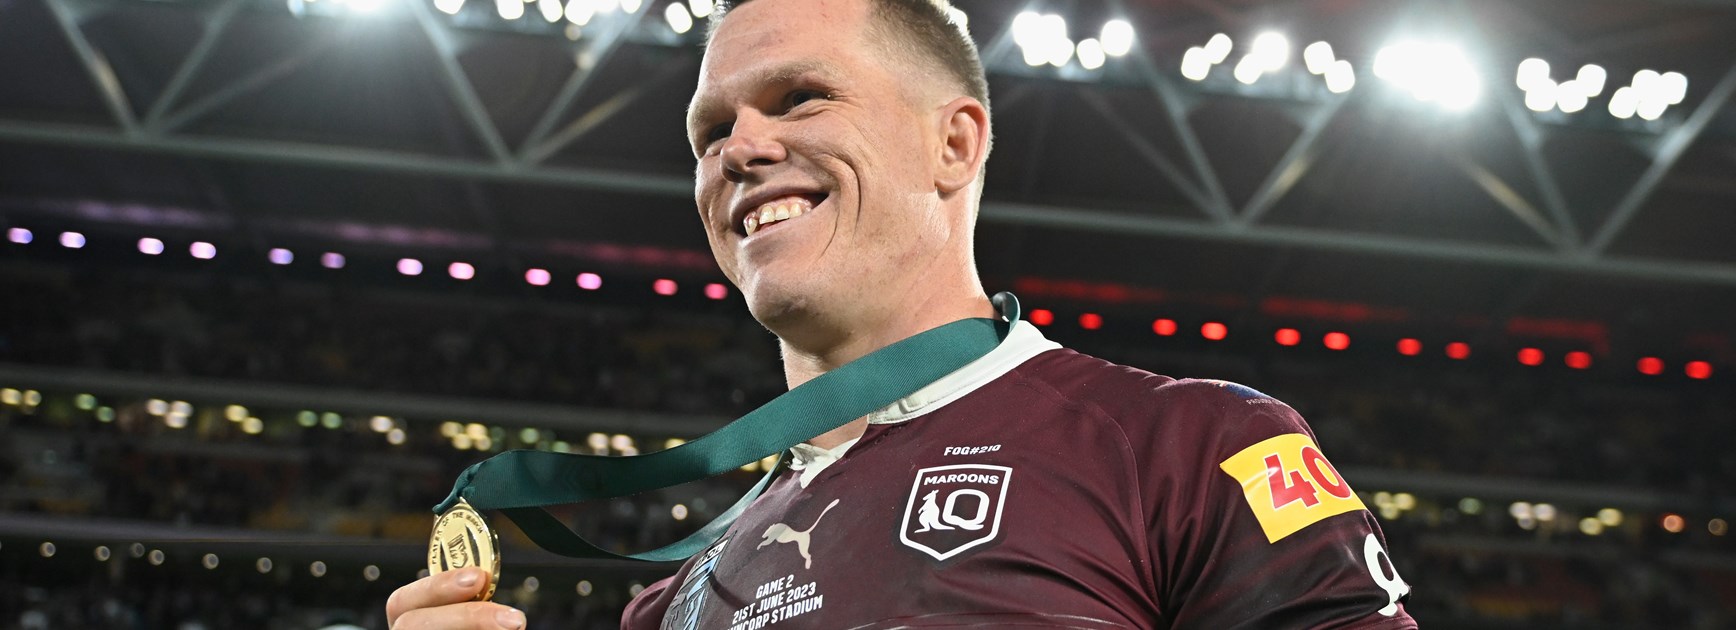 'This one's for Queensland': Collins named Player of the Match